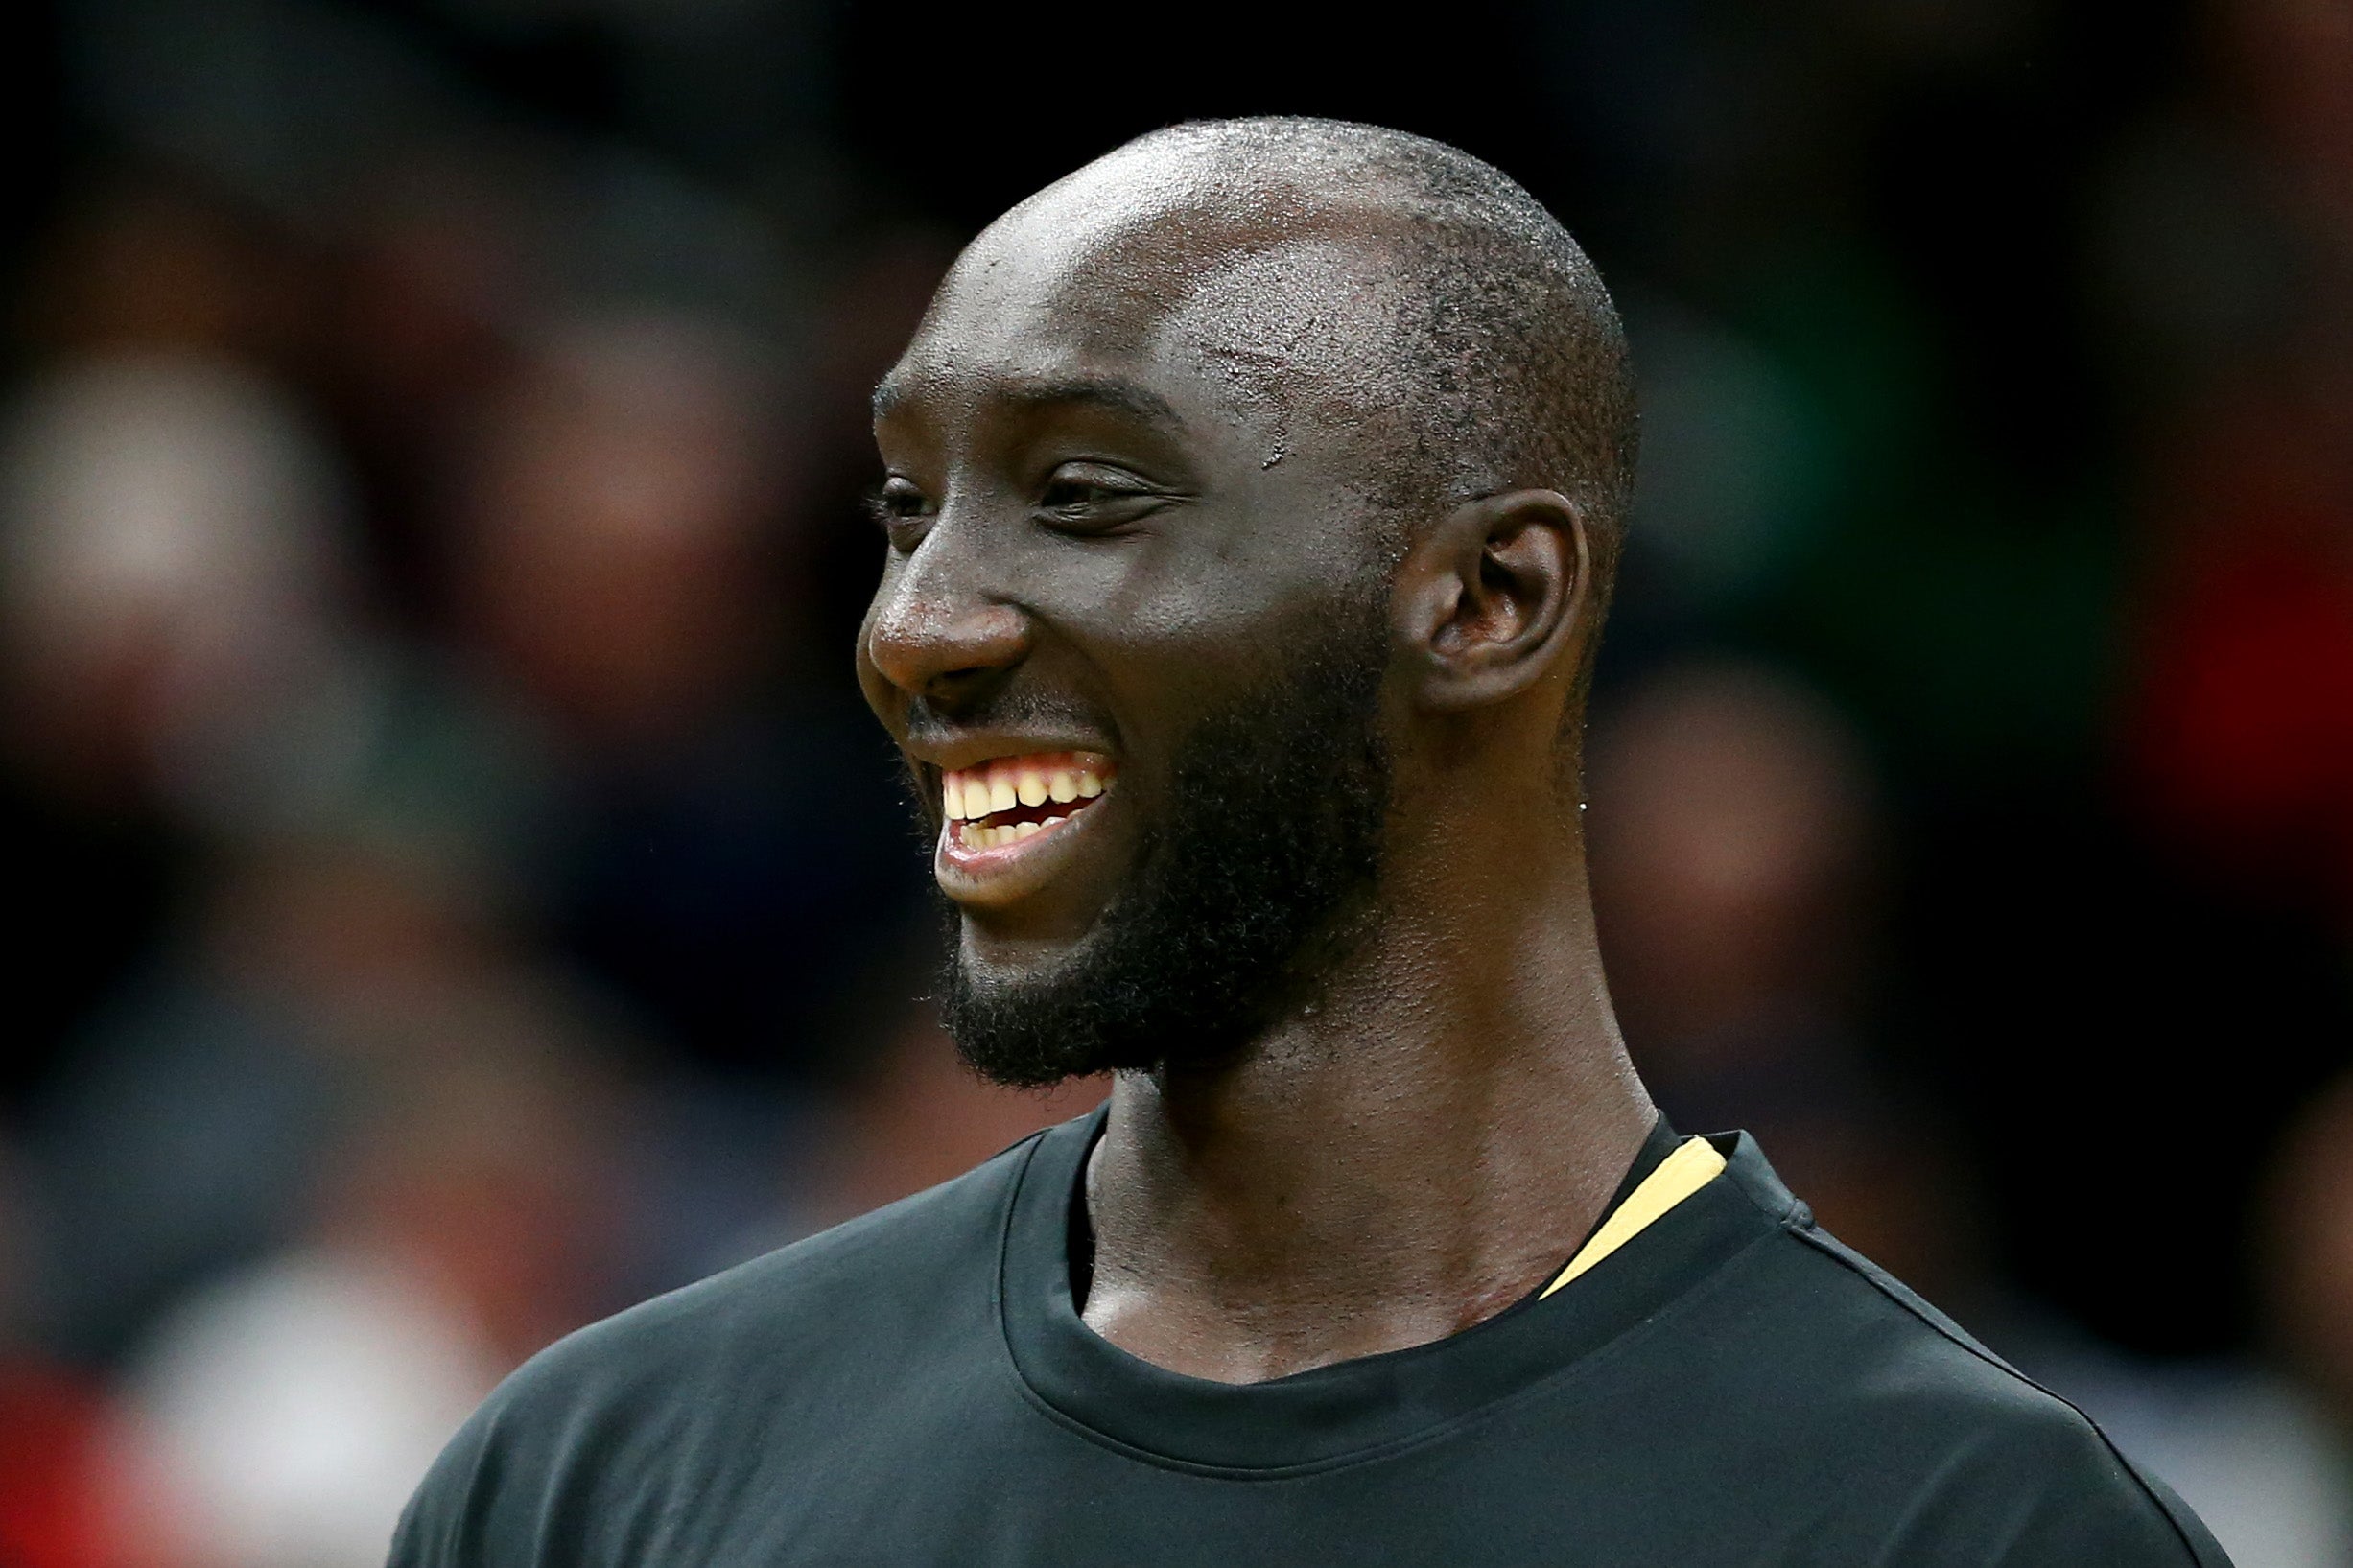 Tacko Fall wants basketball, not attention, to define him in the G-League